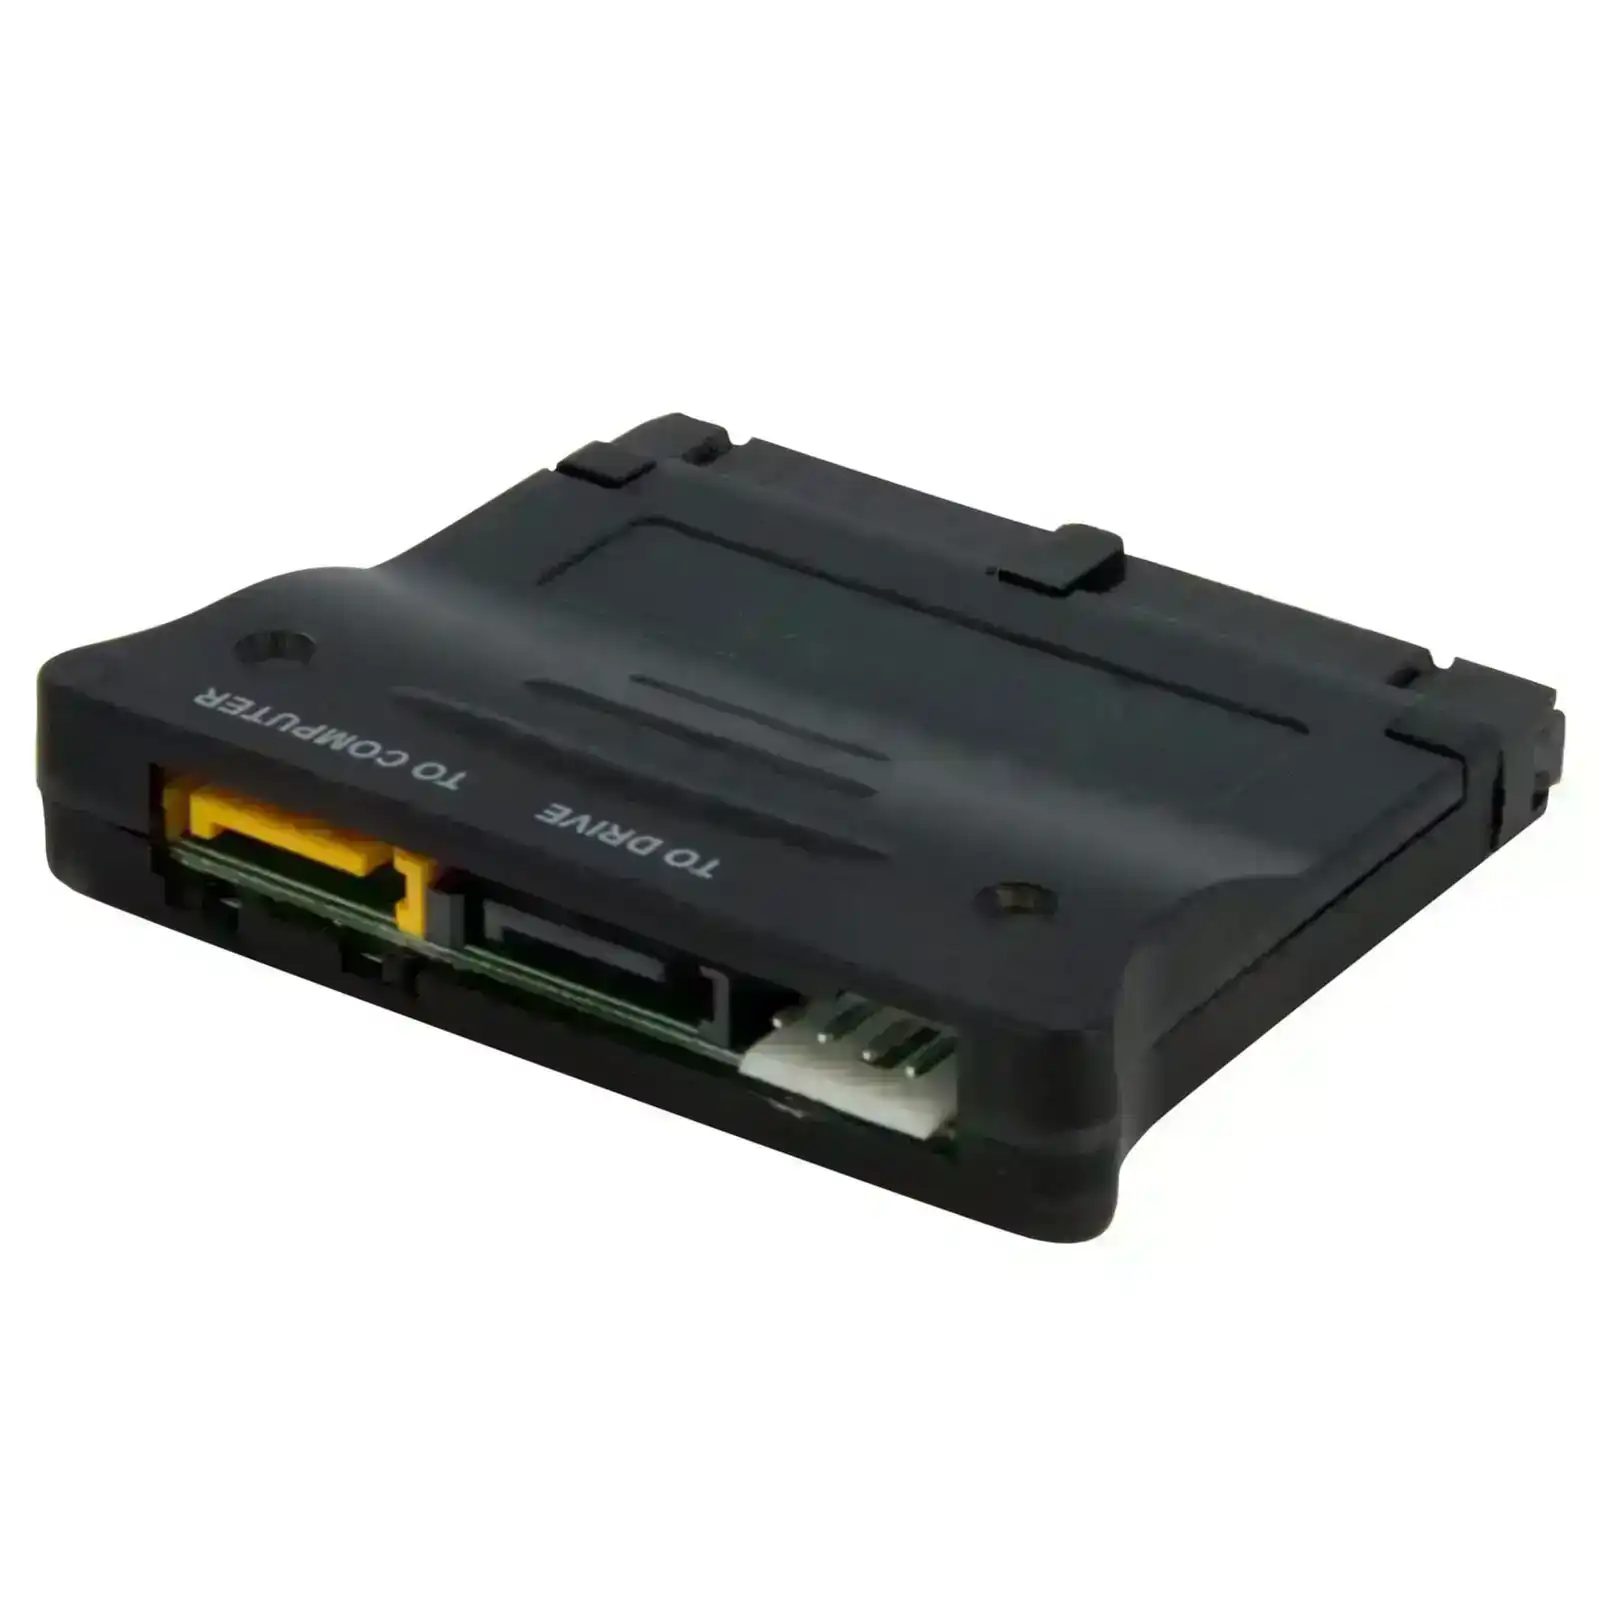 StarTech Bi-Directional SATA to IDE or IDE to SATA Motherboard Adapter/Converter